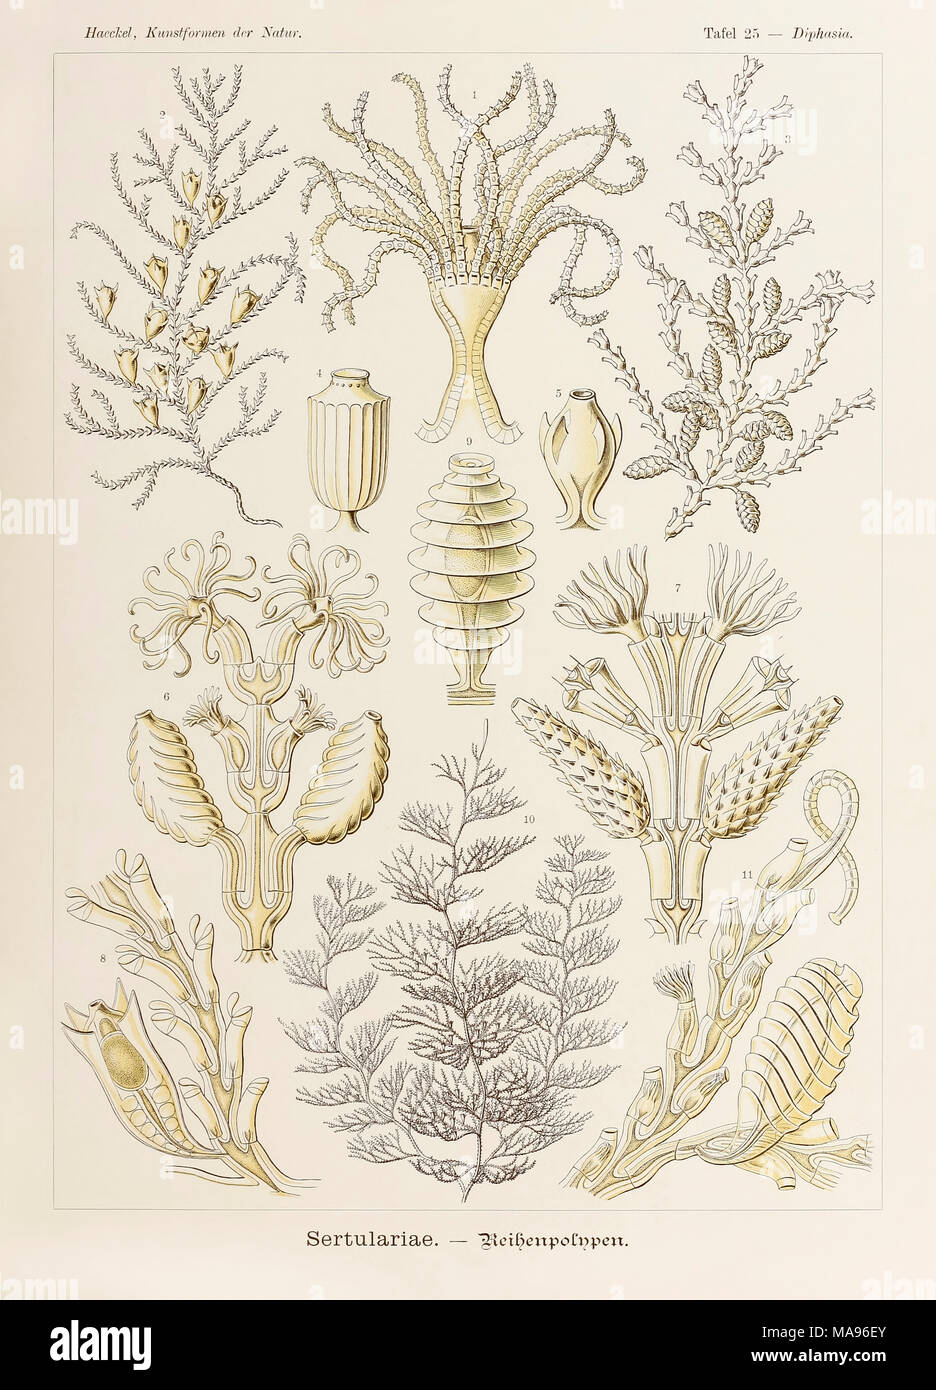 Plate 25 Diphasia Sertulariae from ‘Kunstformen der Natur’ (Art Forms in Nature) illustrated by Ernst Haeckel (1834-1919). See more information below. Stock Photo